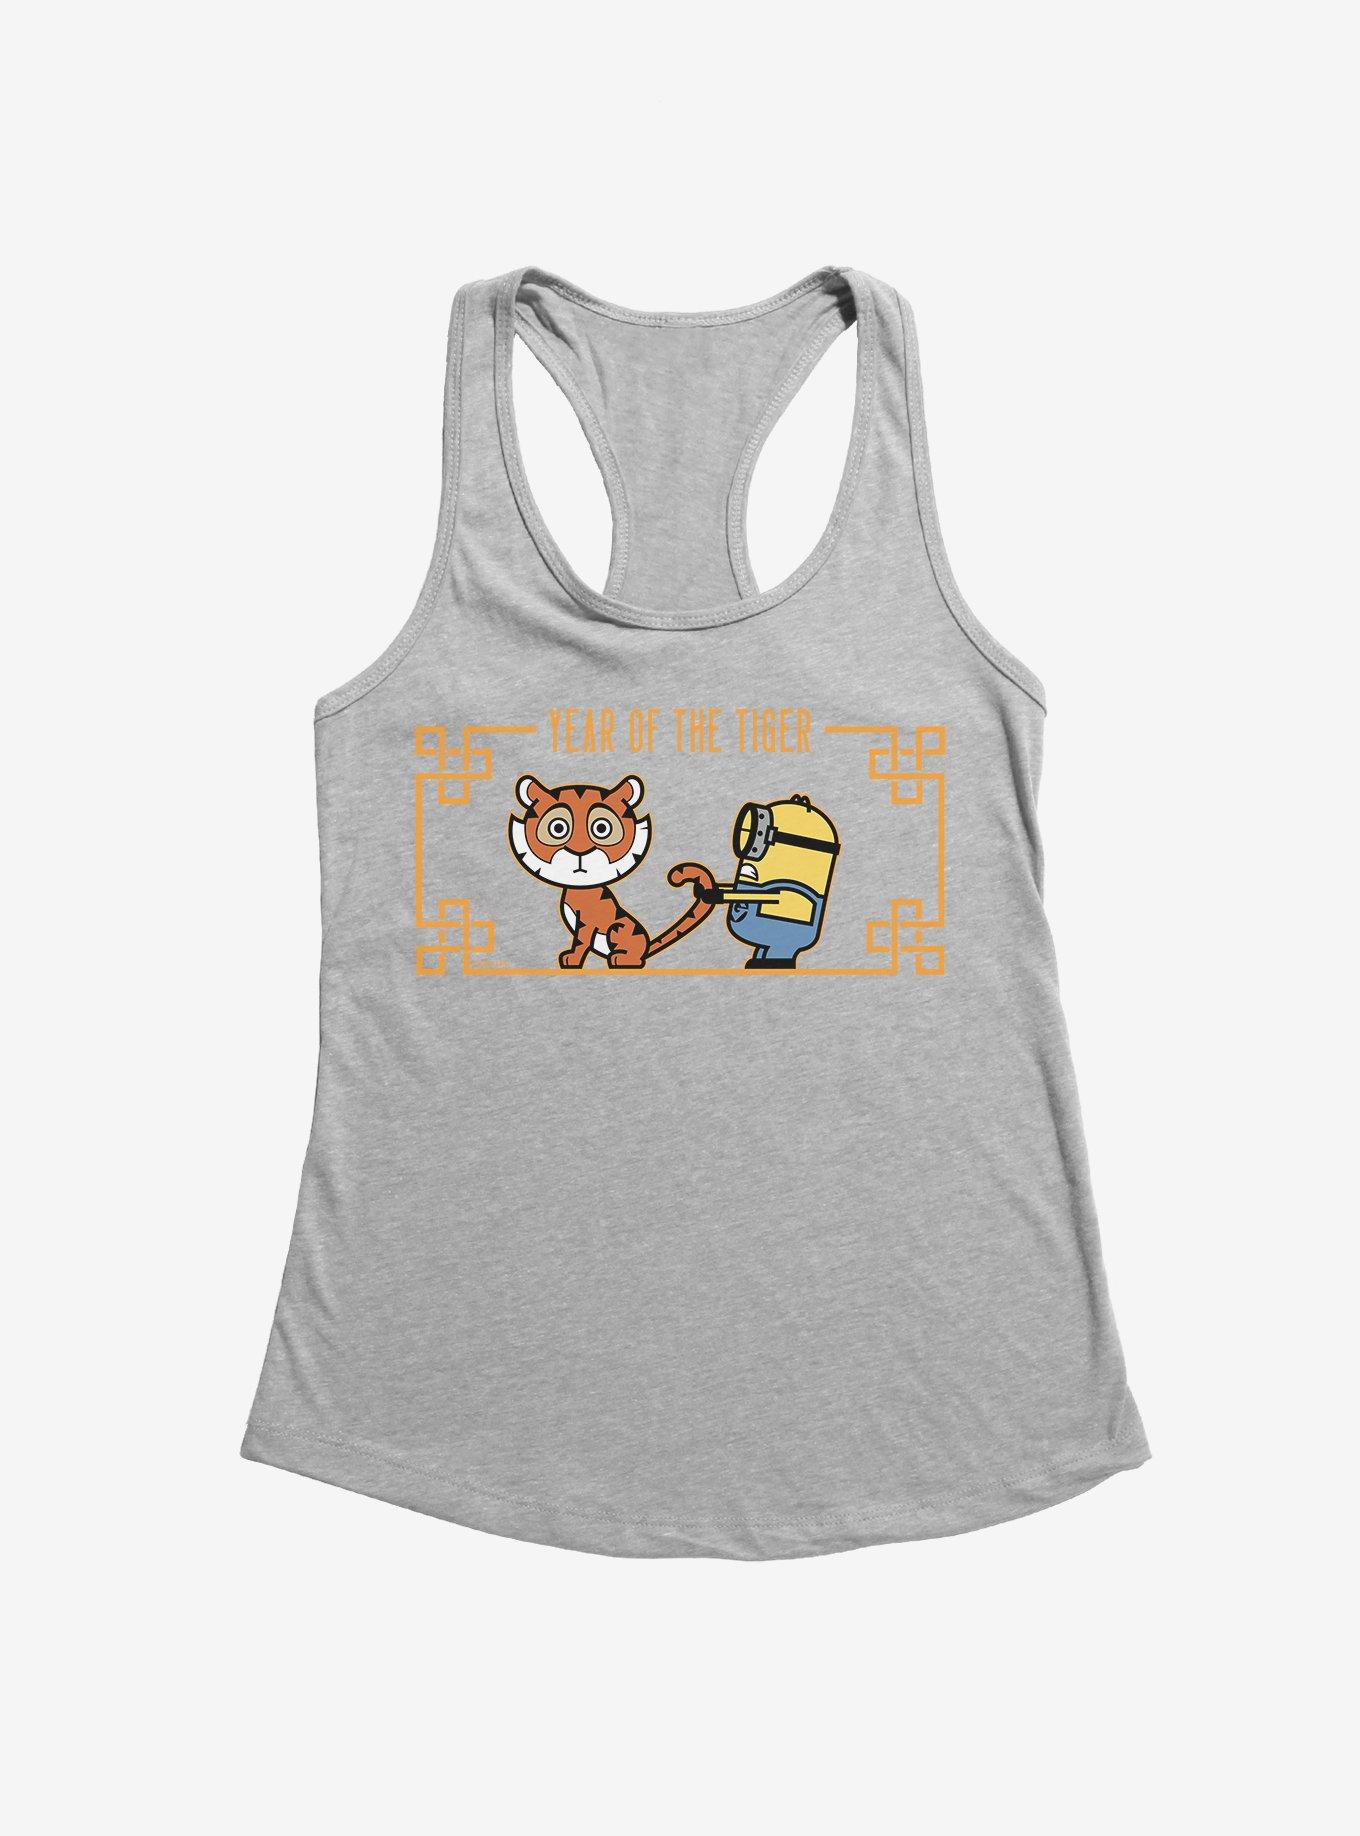 Minions Year of the Tiger By Tail Gold Girls Tank